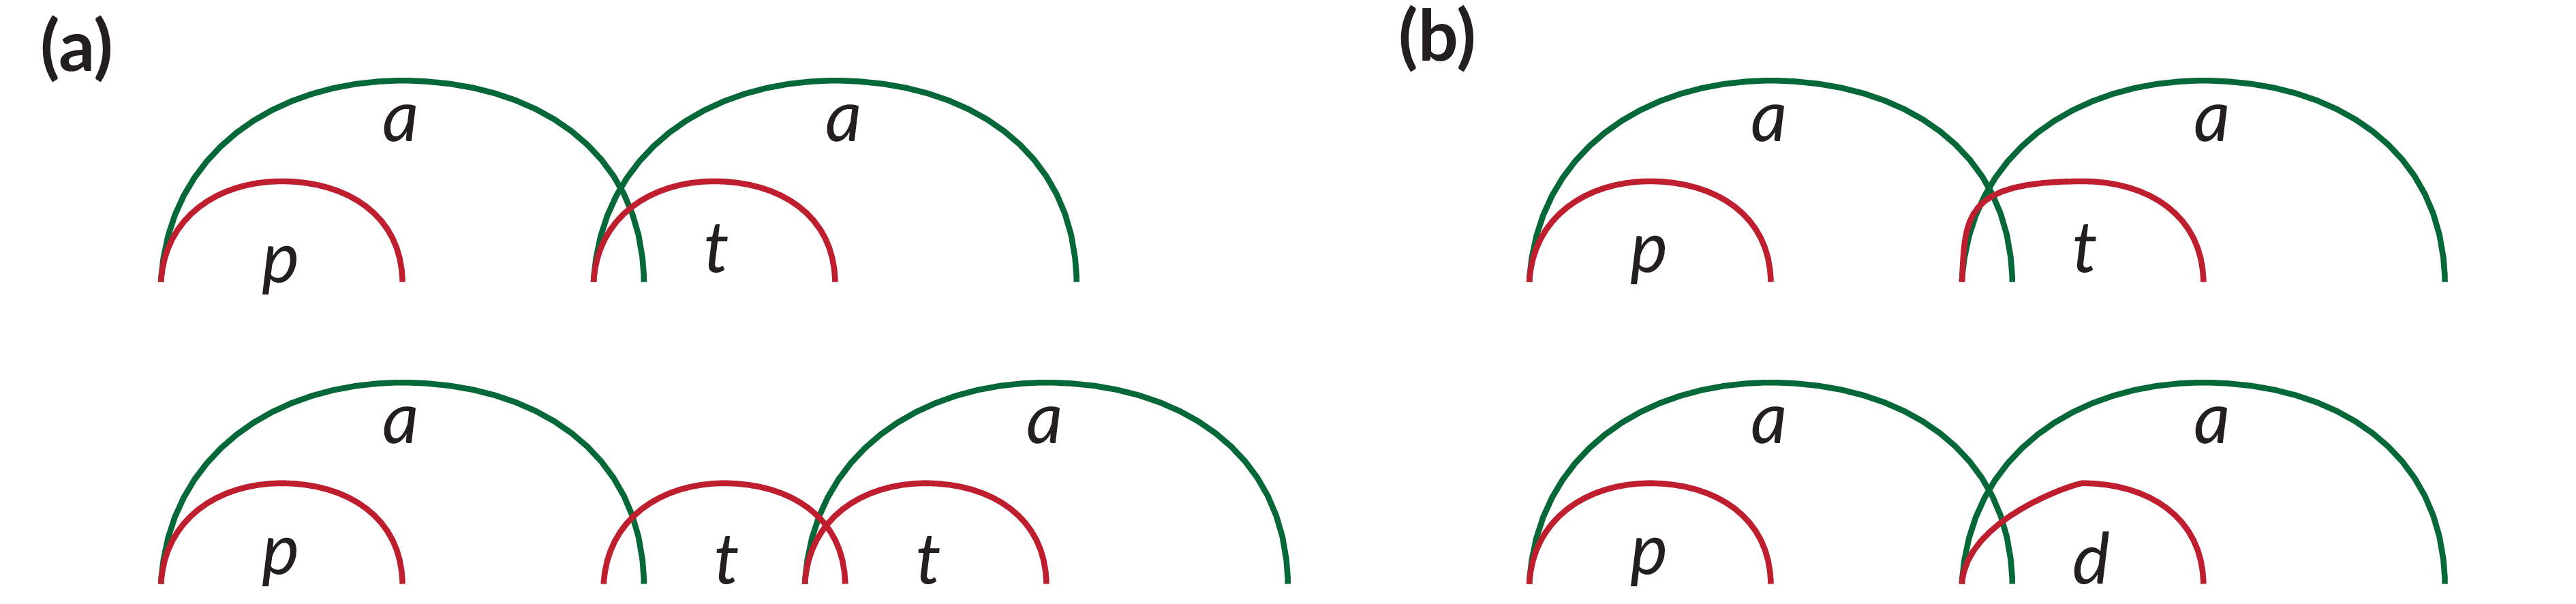 Schematics of the gestural phasing of vocalic and consonantal gestures in four different contexts. (a) shows singleton vs geminate stops, while in (b) voiceless and voiced stops are contrasted. Note that in (a) the distance between the vowels increases in the geminate context, while it is stable in (b). The different slopes of the closing part of the gesture in /t/ vs /d/ accounts for the difference in acoustic closure onset.